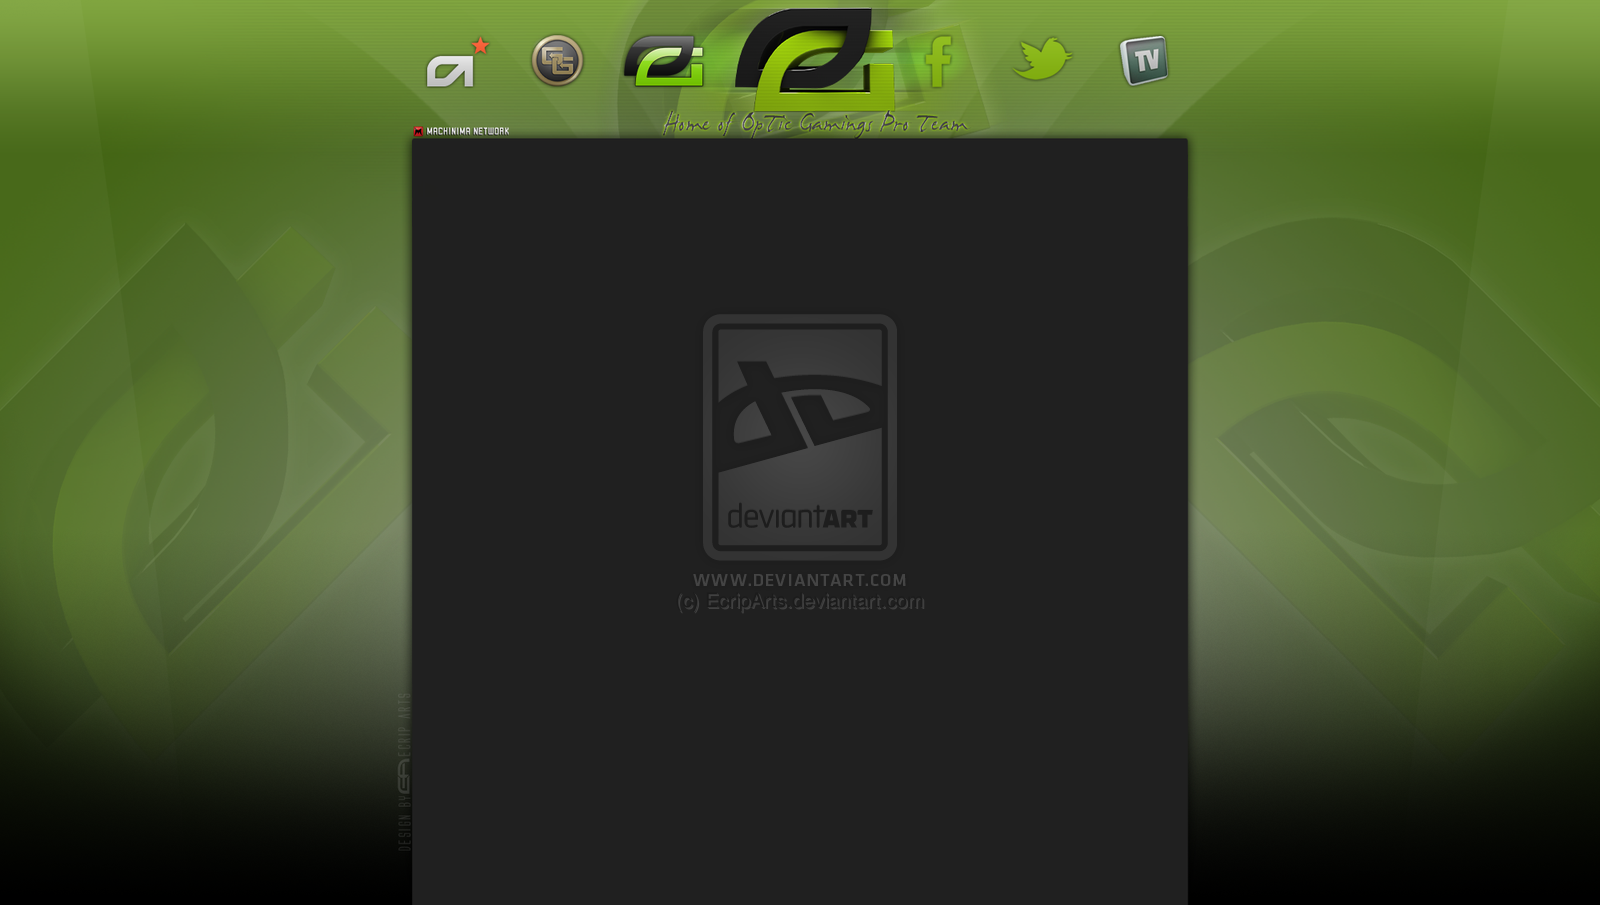 Optic Gaming iPhone Background Pro Team Bg By